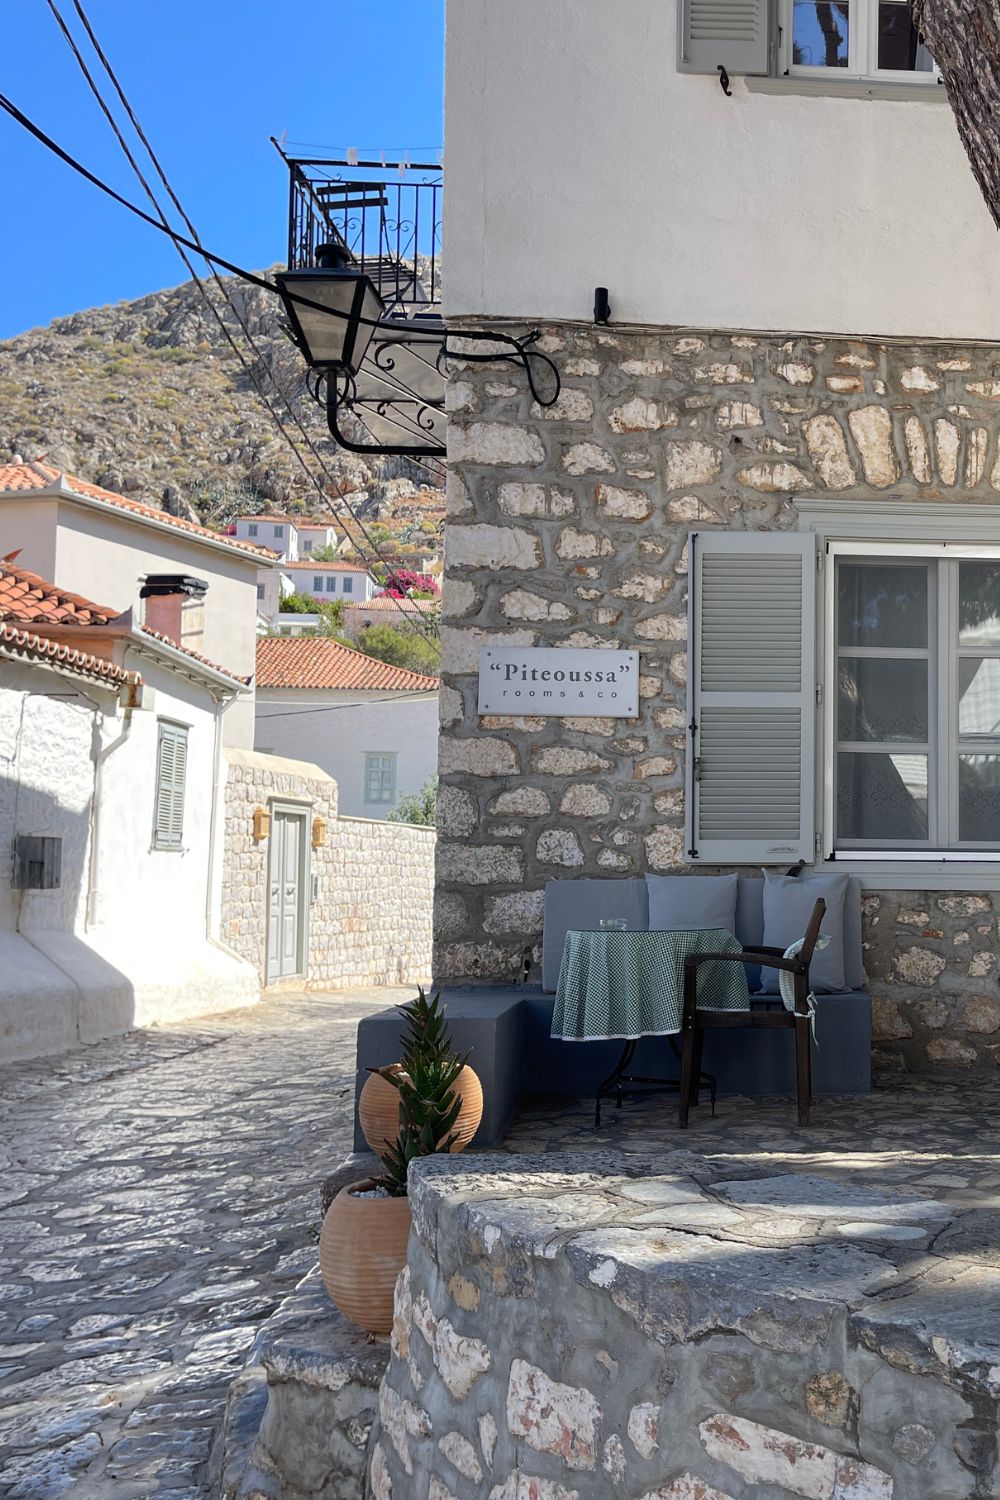 Quaint cobblestone alley in Hydra leading to 'Piteoussa rooms & co,' a charming guesthouse with inviting outdoor seating, nestled among traditional Greek architecture.